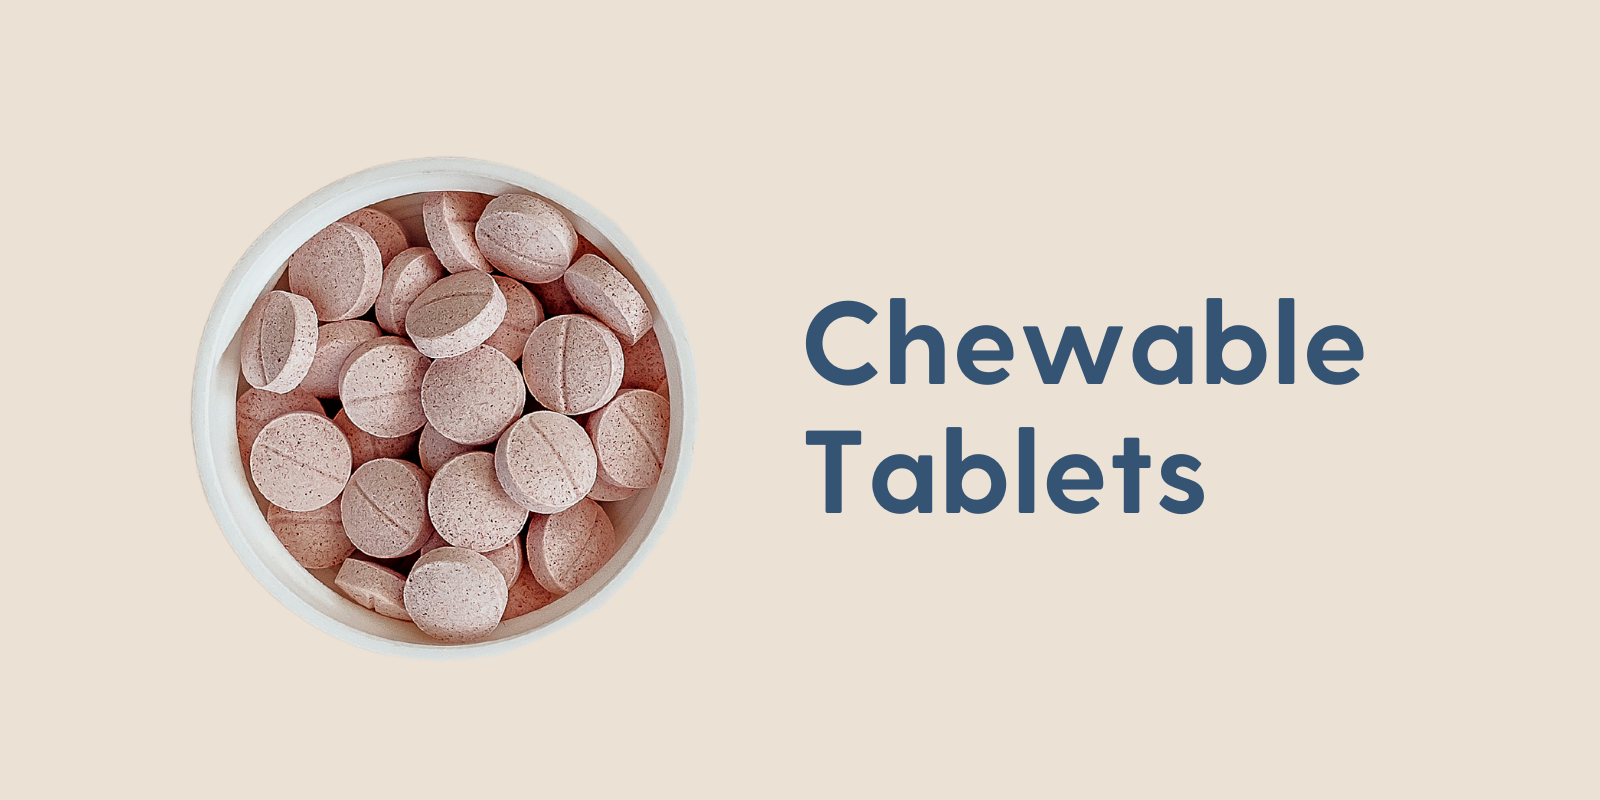 Chewable Tablets